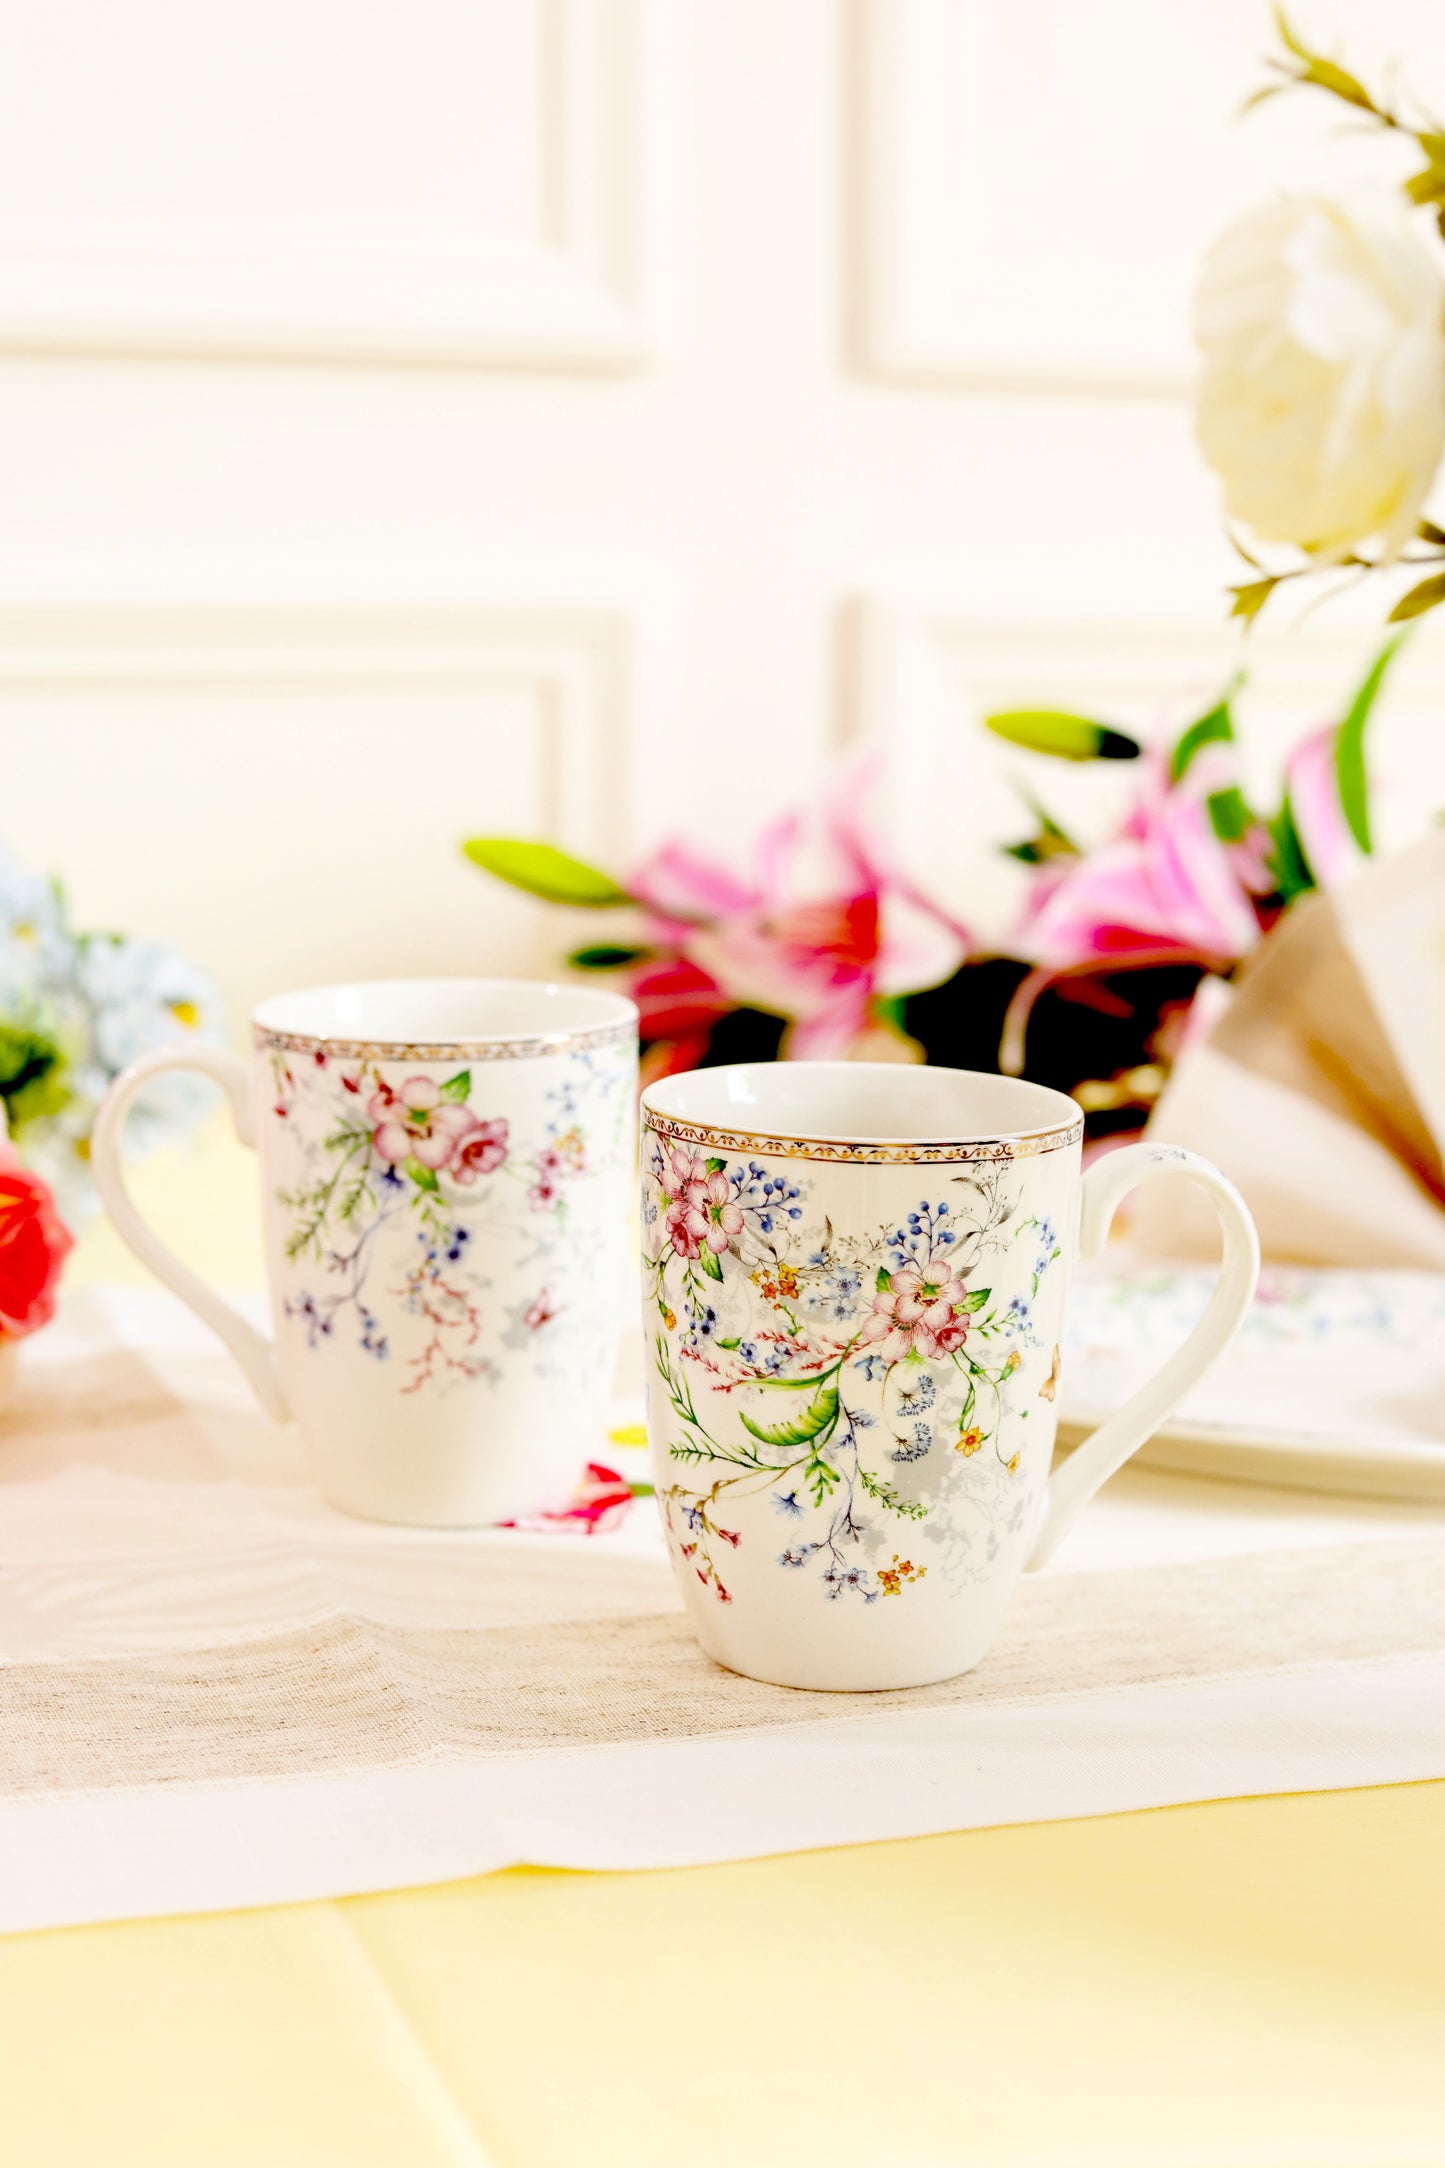 Flower Bed Coffee Mugs and Tray